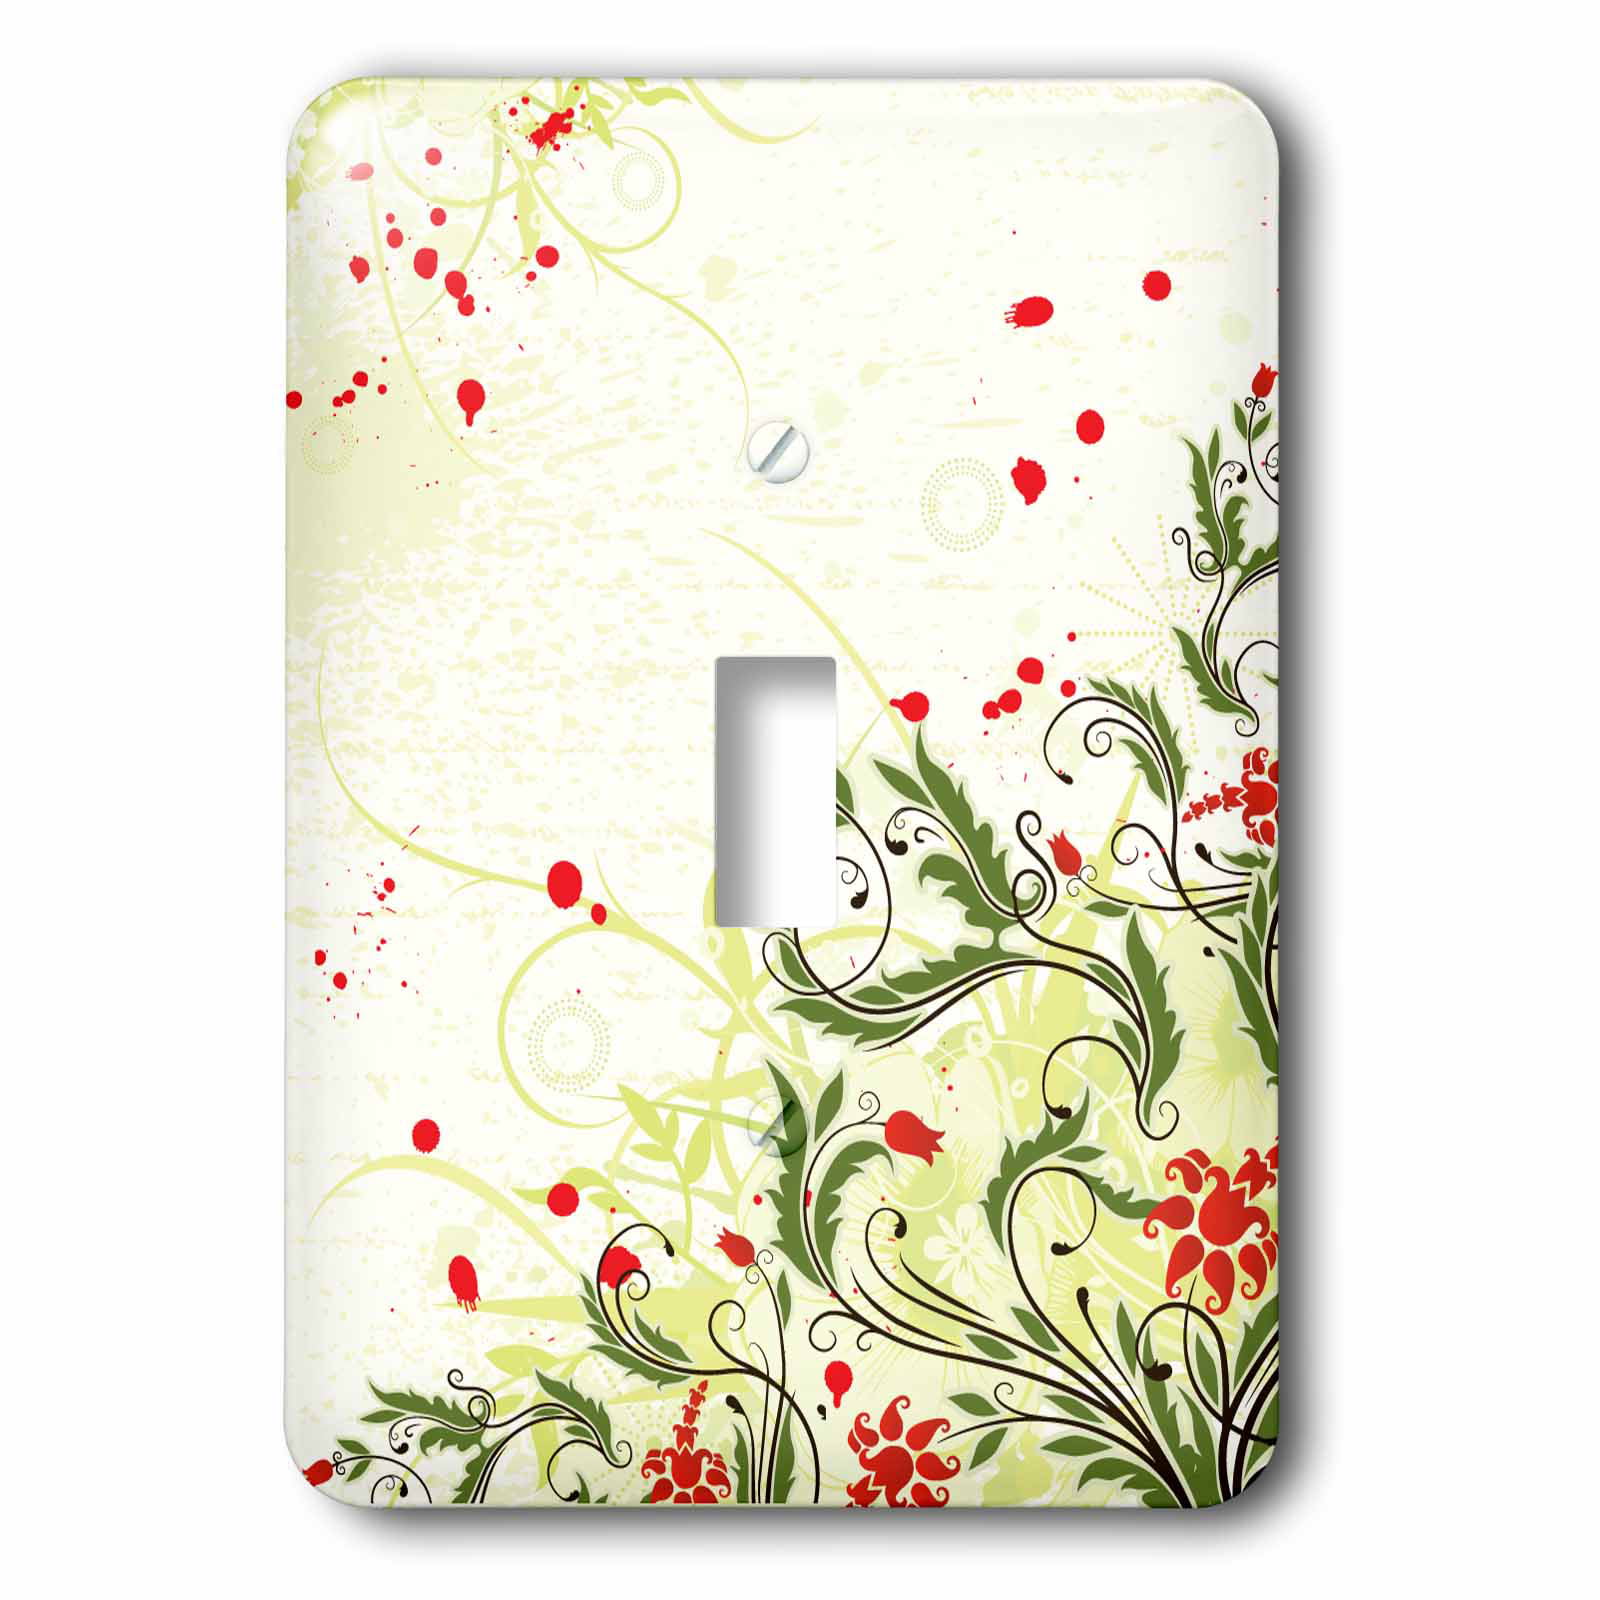 3dRose lsp_60550_2 Sing Dance Enjoy Life Red N Gold Floral Scroll Double Toggle Switch